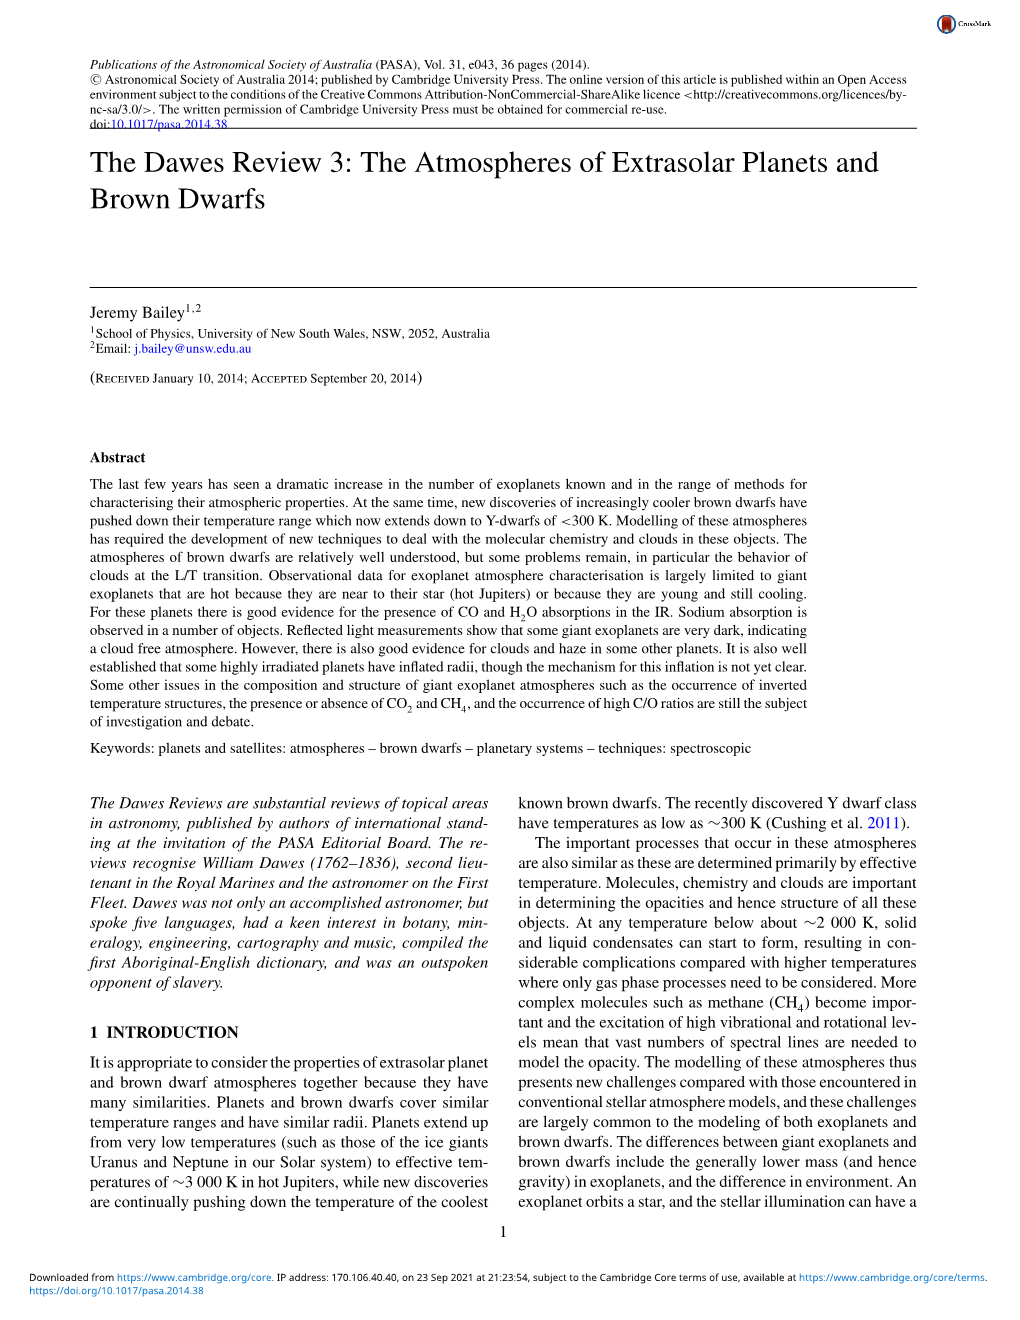 The Dawes Review 3: the Atmospheres of Extrasolar Planets and Brown Dwarfs